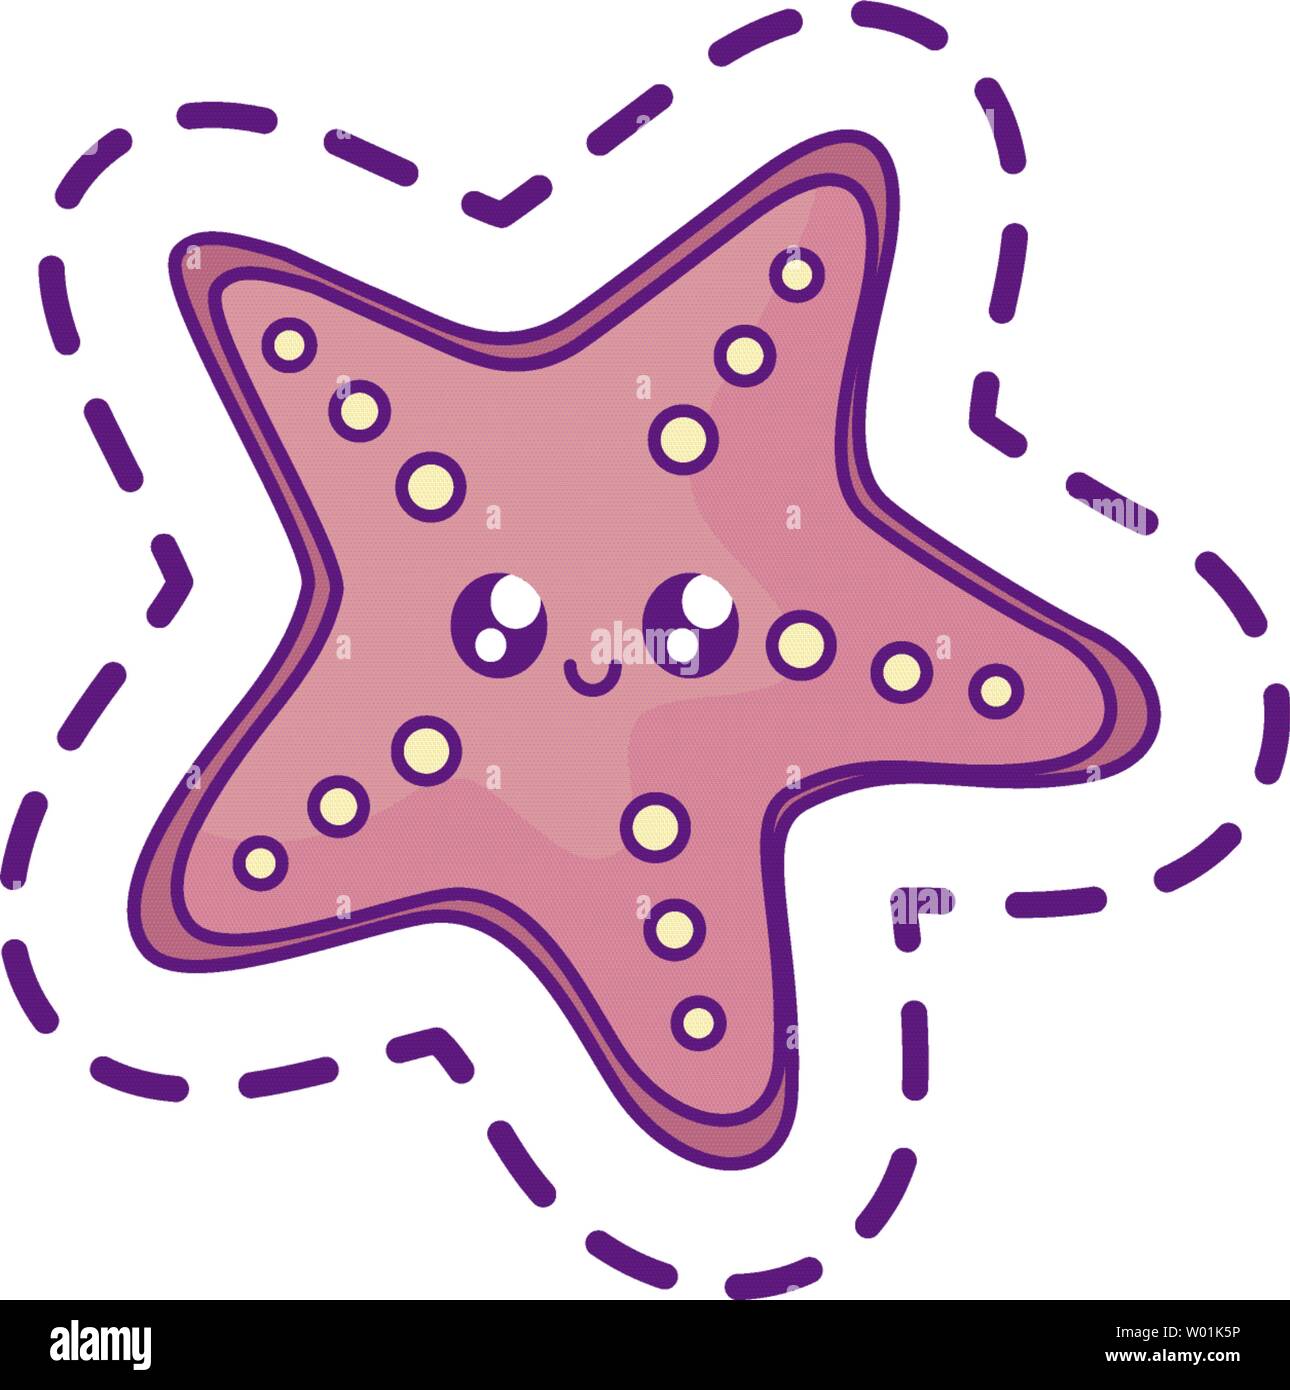 Learn How to Draw a Starfish for Kids (Animals for Kids) Step by Step :  Drawing Tutorials